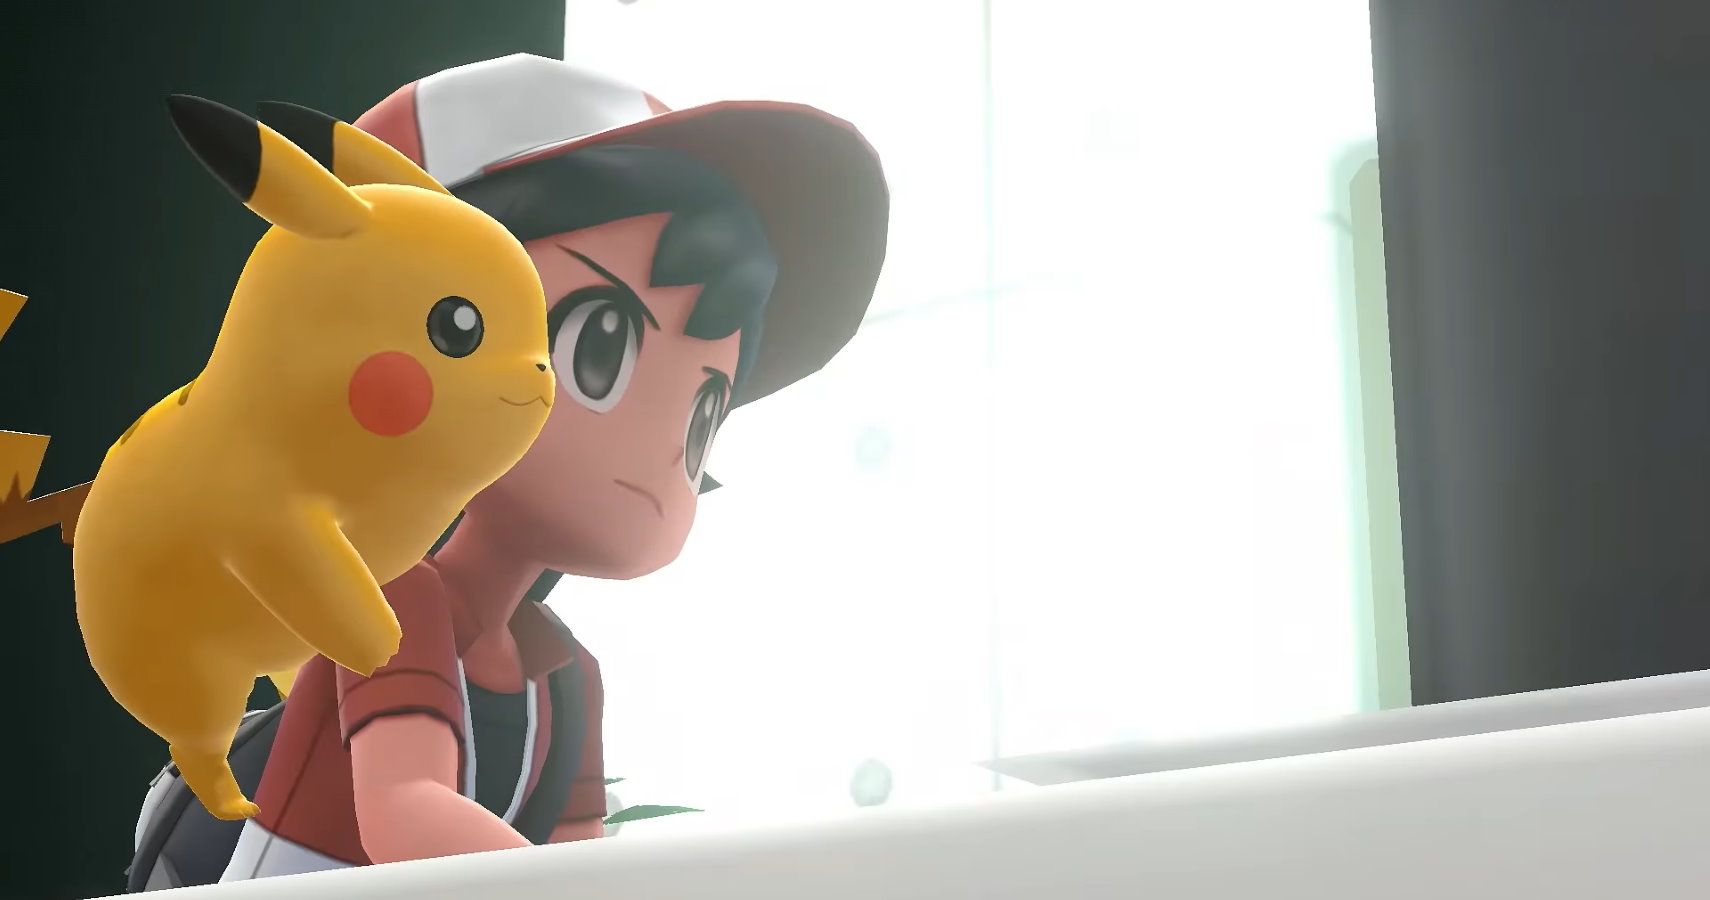 Pokémon Choose Your Own Adventure Panel At PAX East Will Turn You Into A Pokémon Trainer